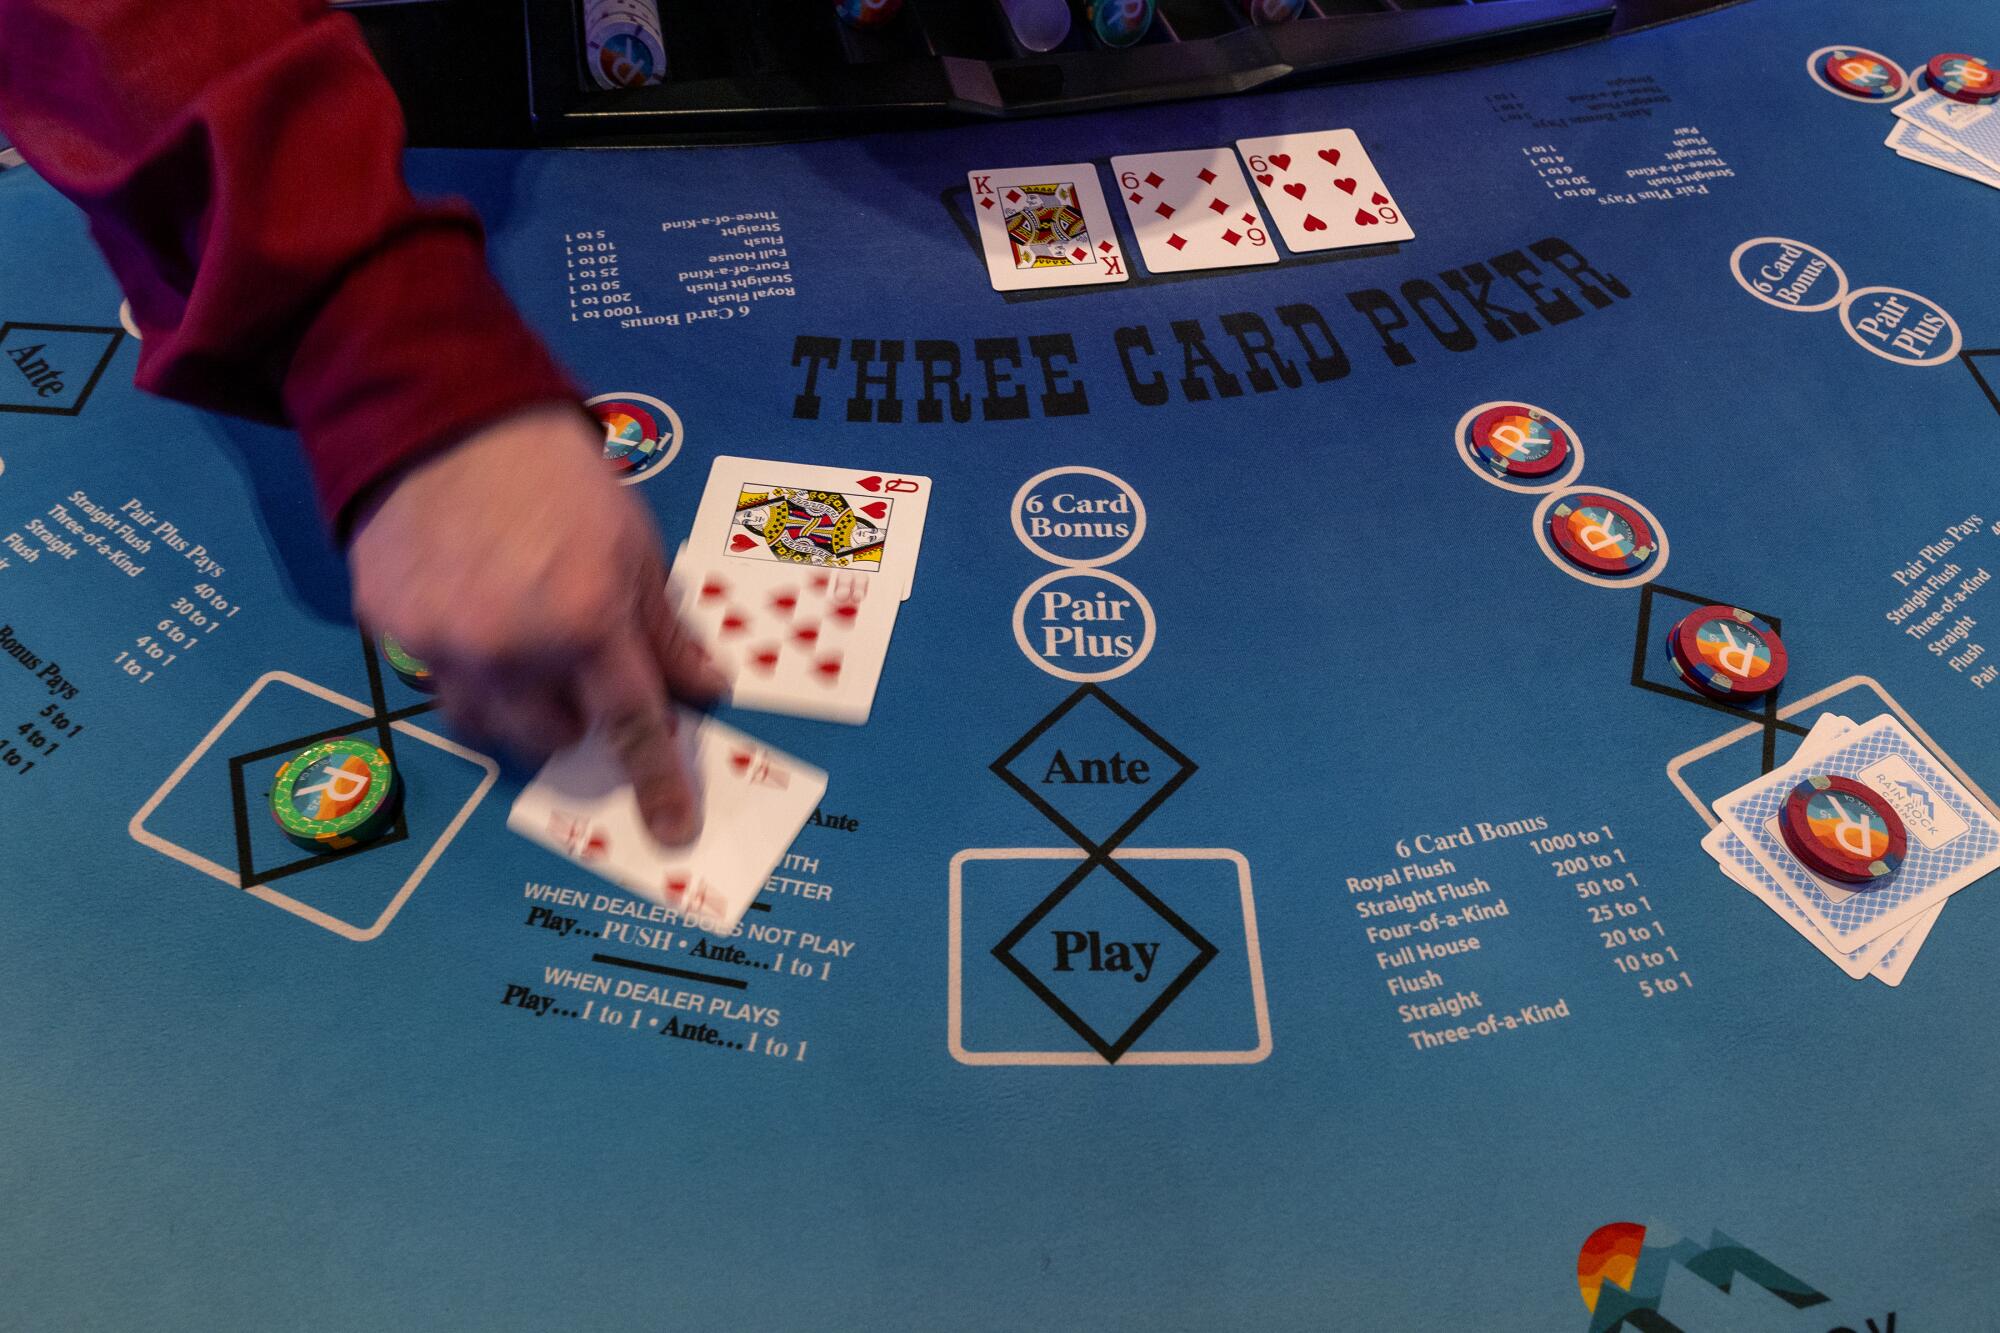 A close-up view of a dealer's hand on a poker table  